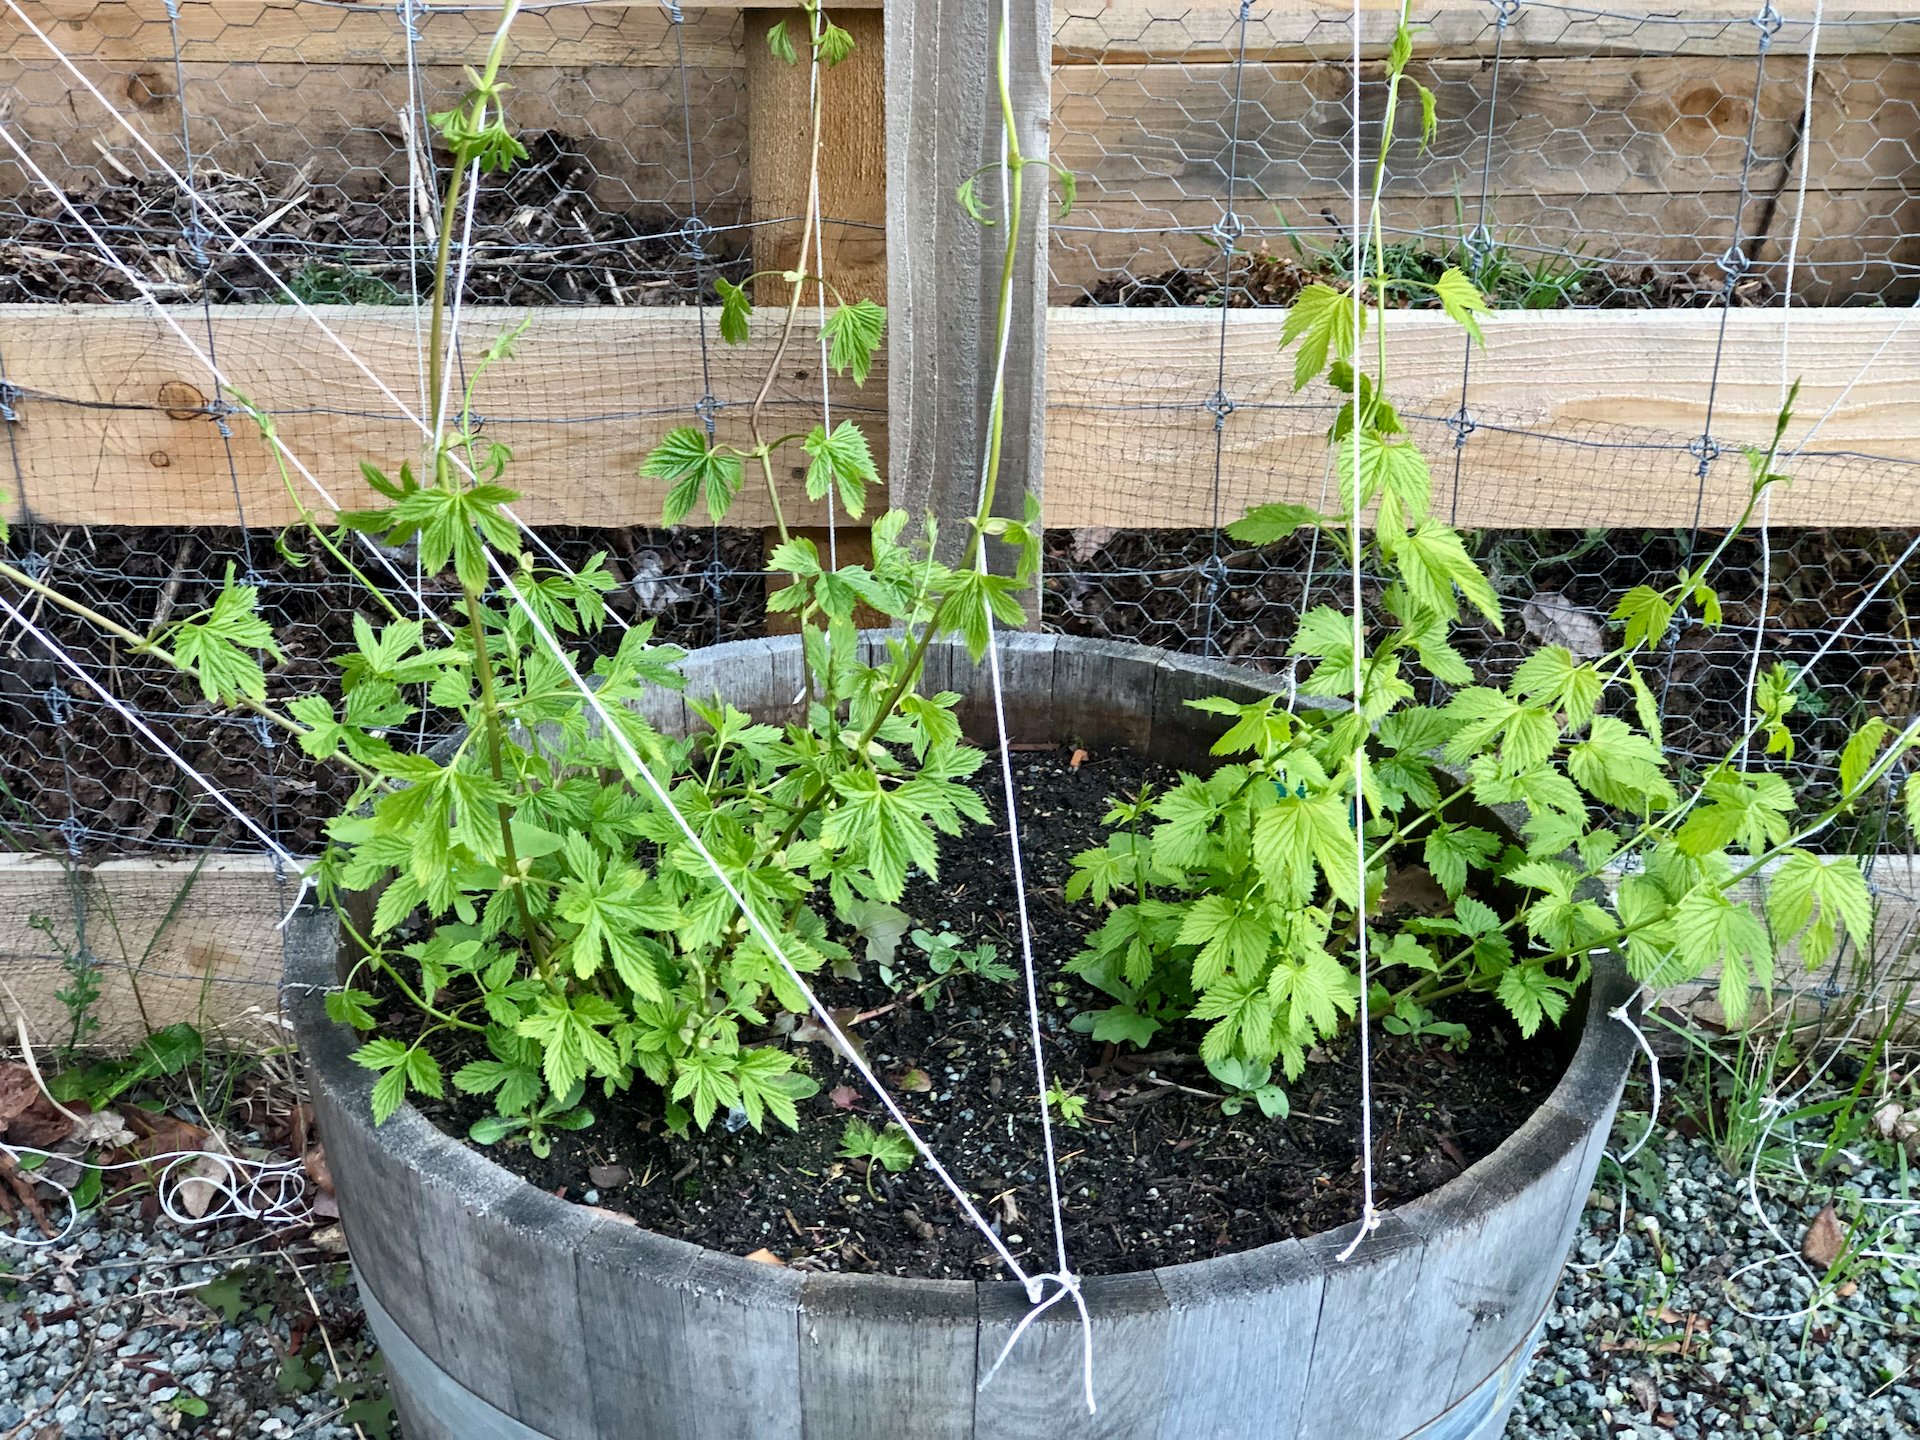  The hops have come back well from last year. There’s probably three times as many shoots this time. We had to redo the ropes they are climbing on. 